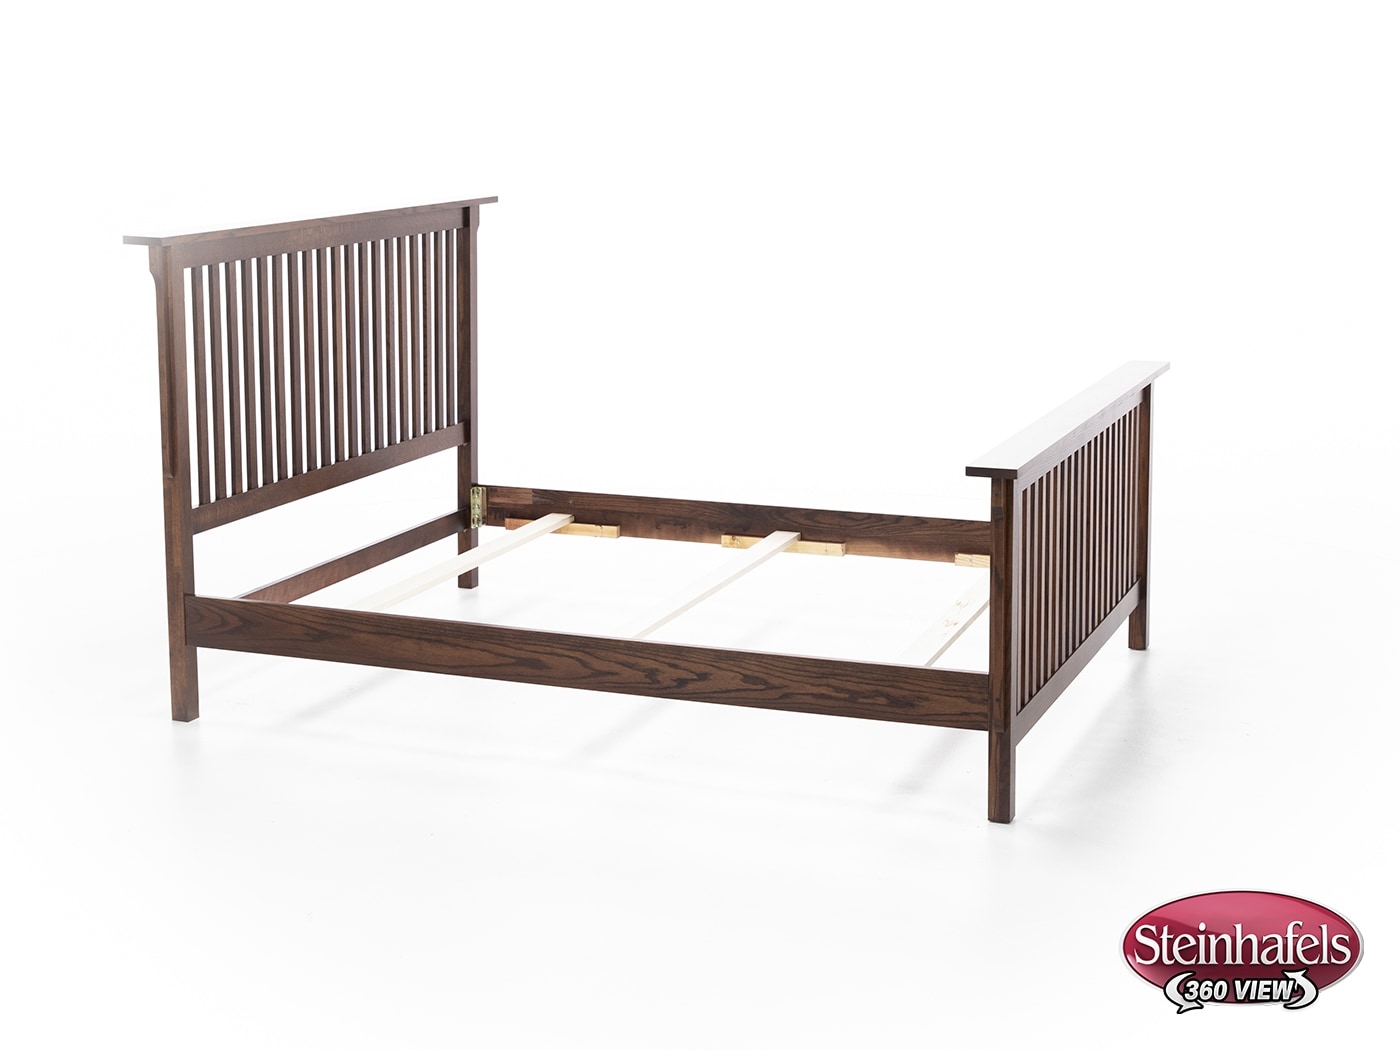 witmer furniture brown queen bed package  image qplf  